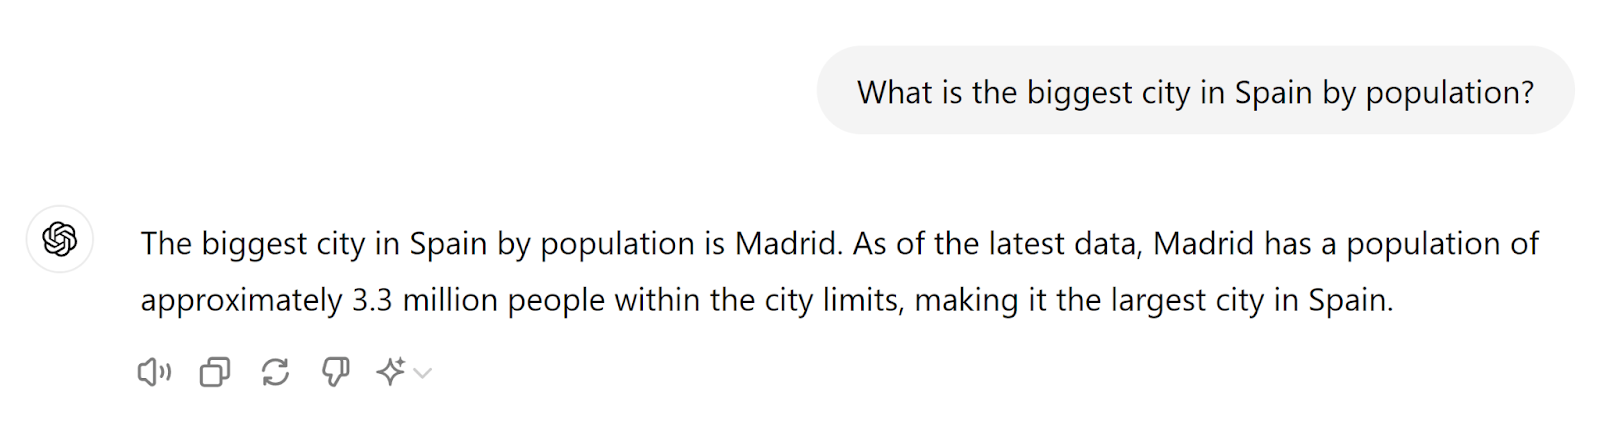 ChatGPT response to the question 'What is the biggest city in Spain by population?'